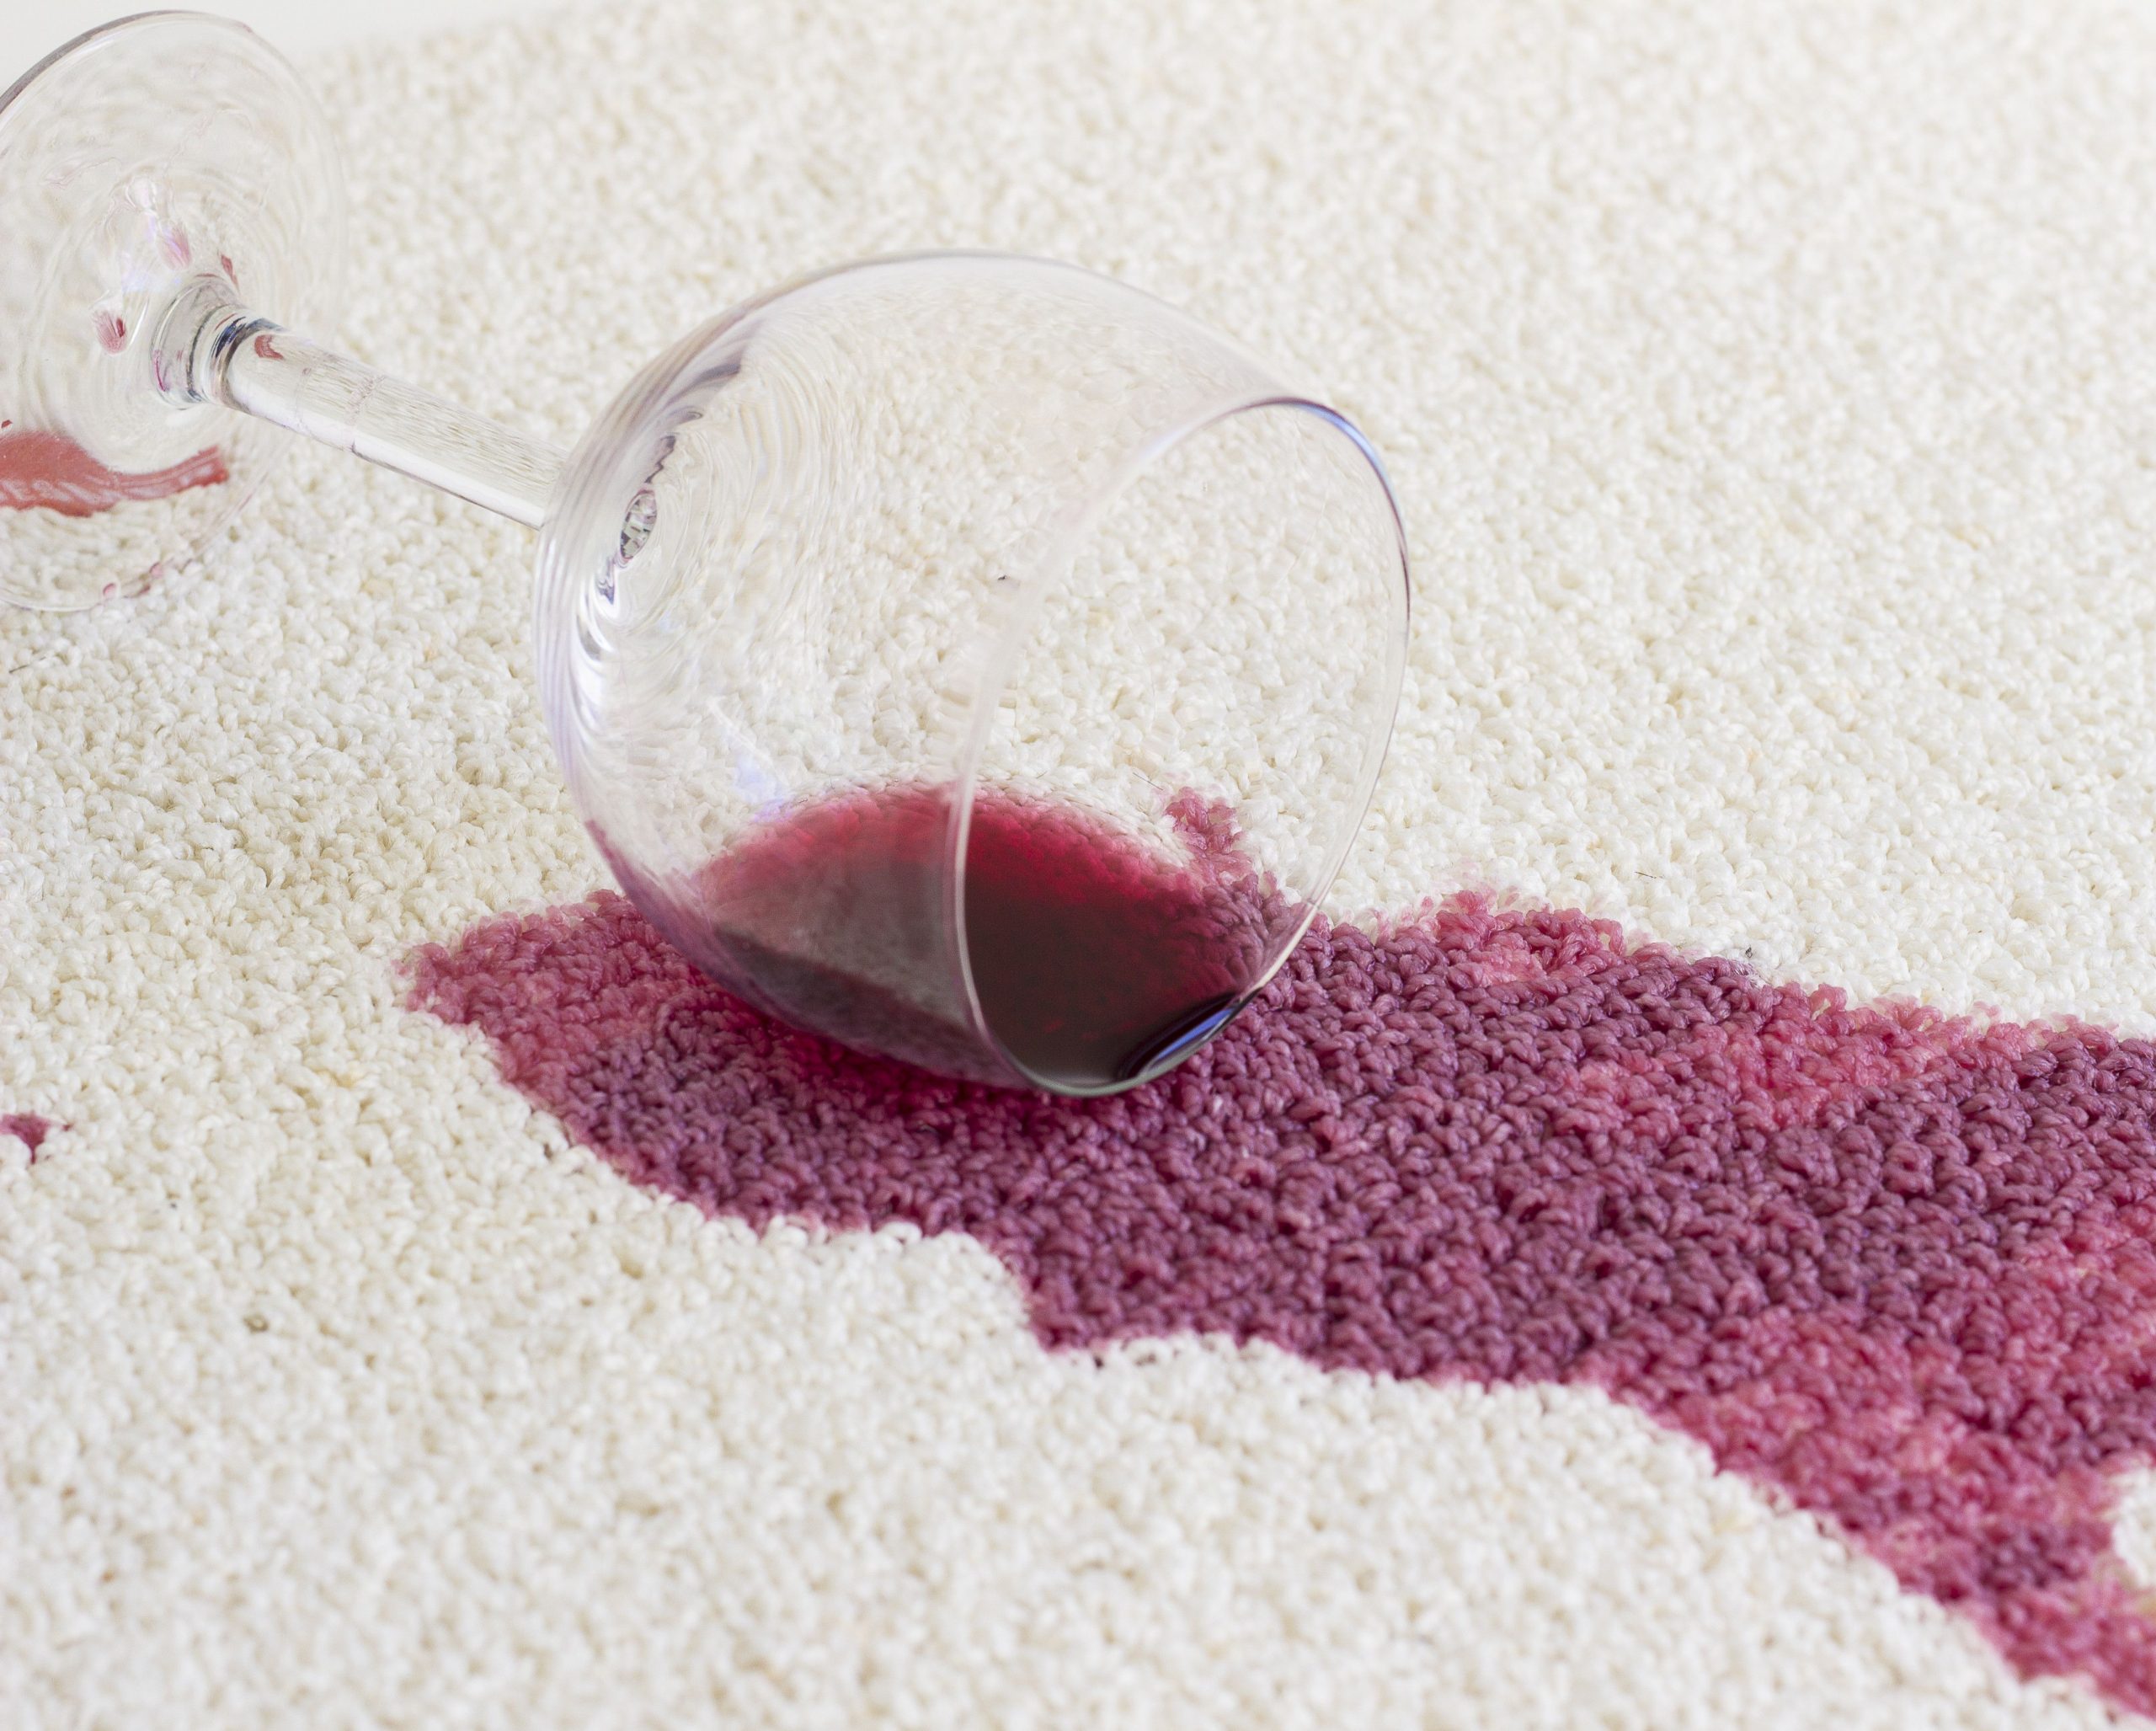 How To Get Rid Of Old Red Wine Stains From Carpet